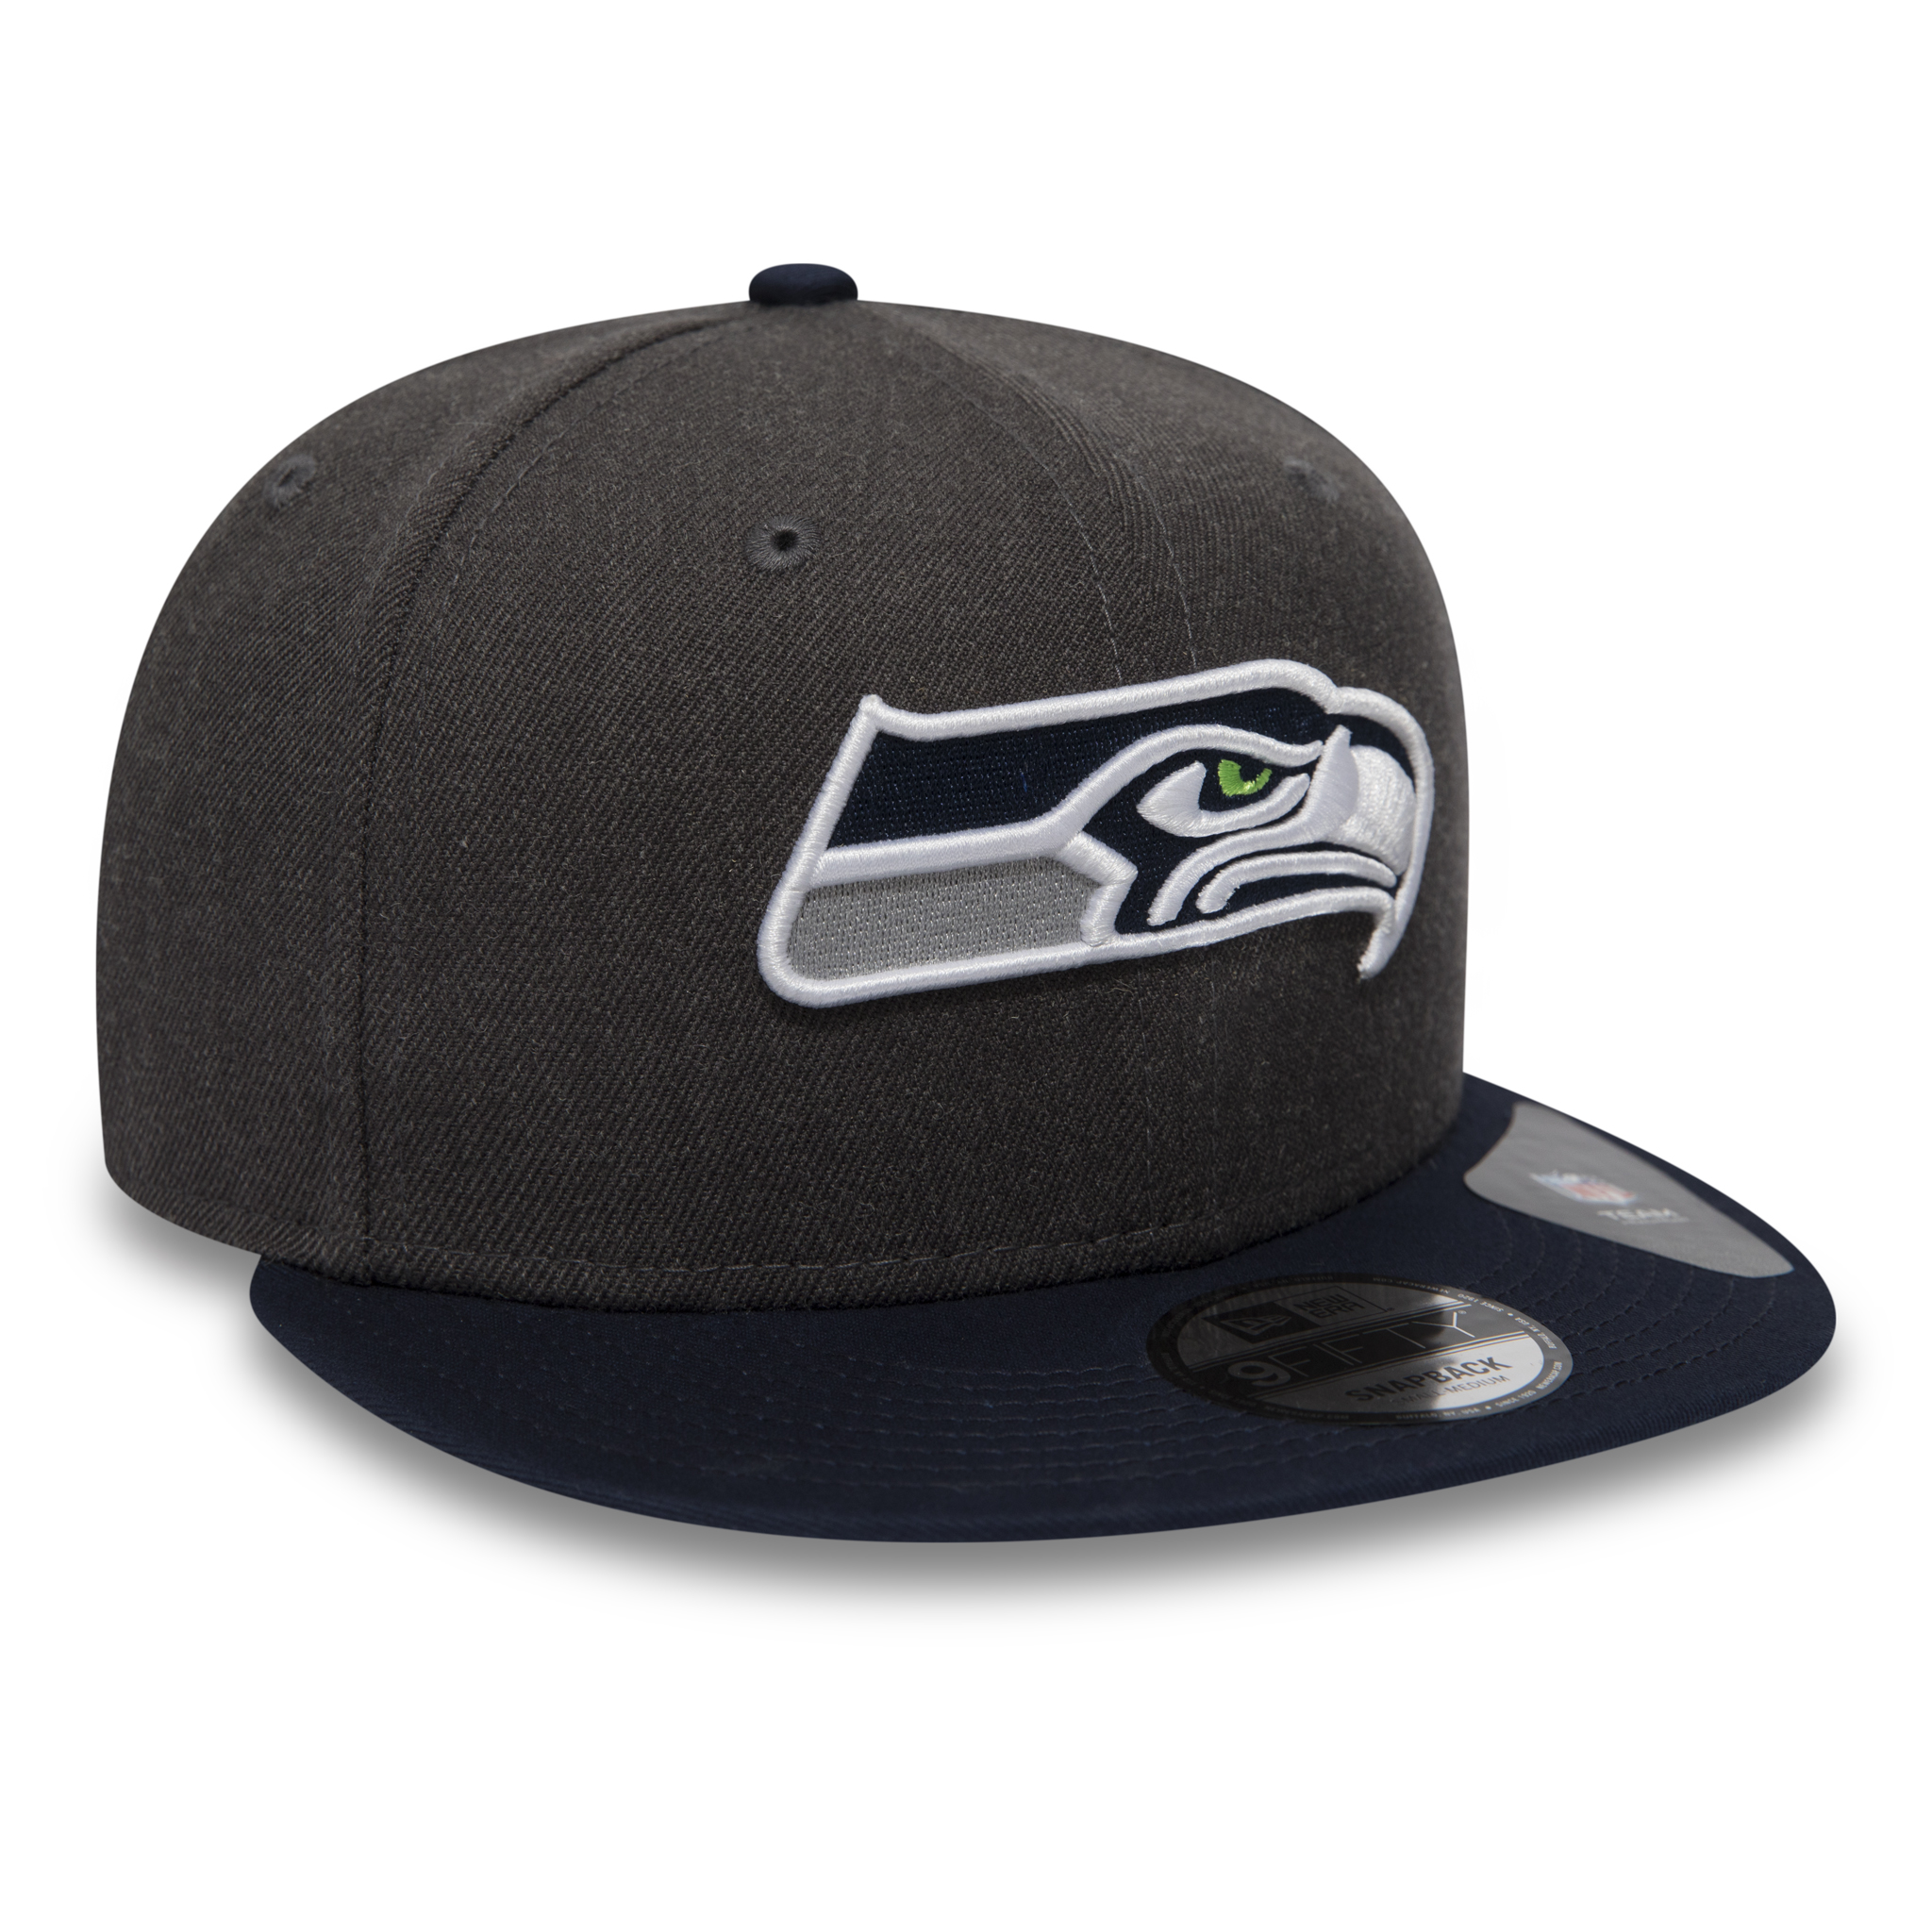 Seattle Seahawks Graphite 9FIFTY Cap